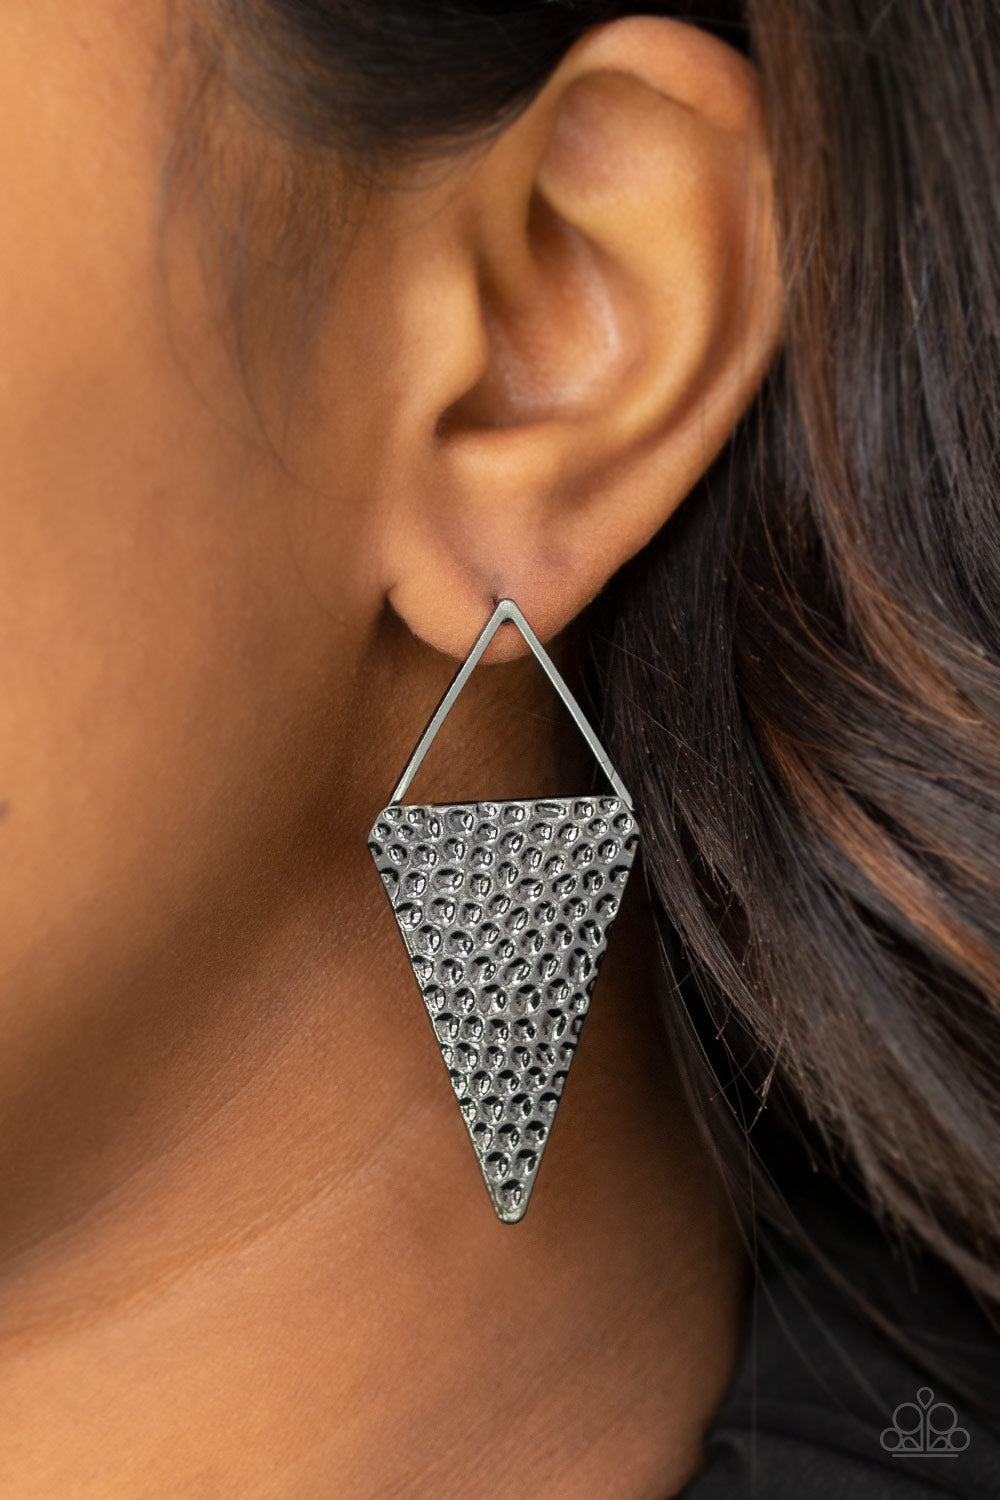 Have A Bite- Gunmetal Earrings- Paparazzi Accessories